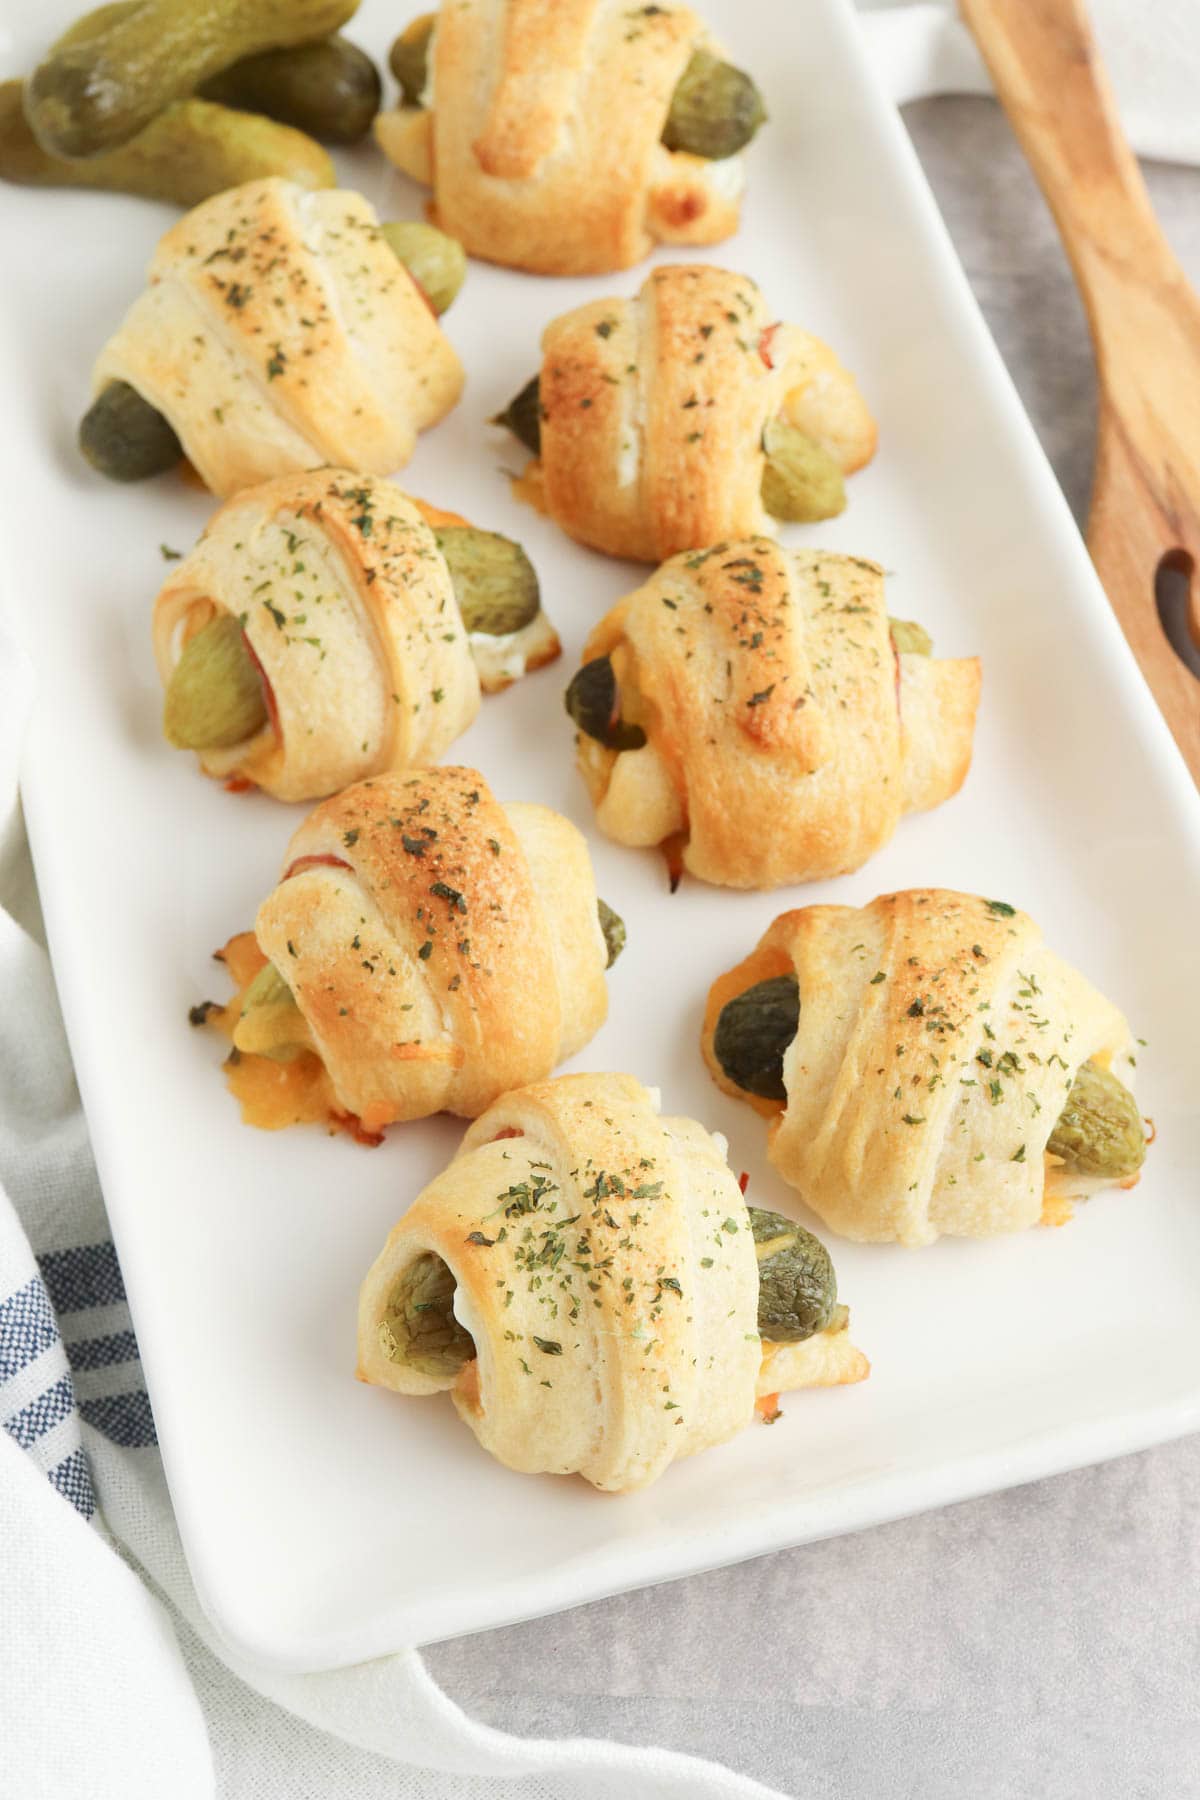 Pickles wrapped in crescent rolls on white plate